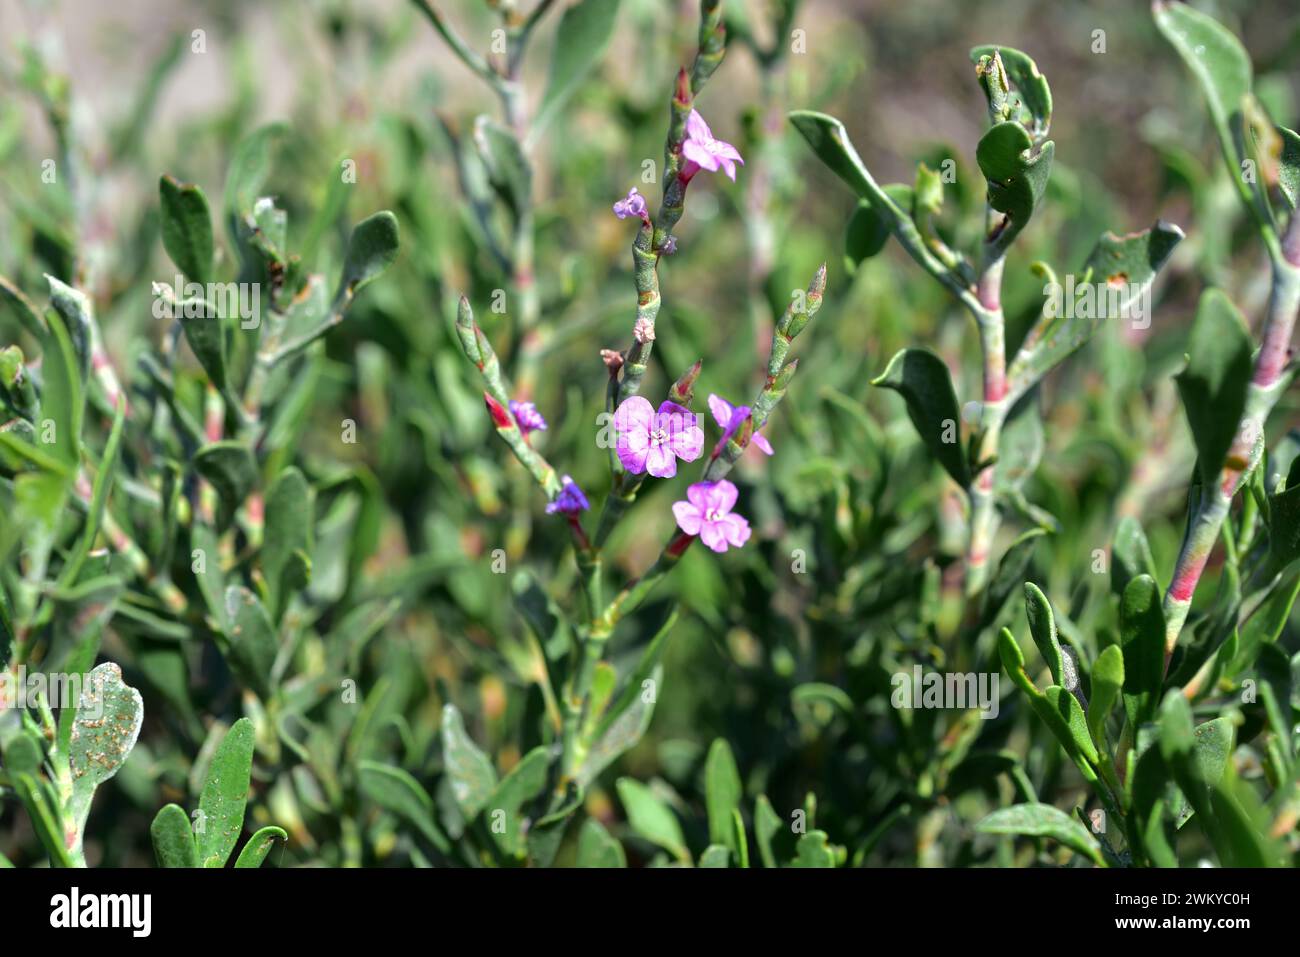 Salado (Limoniastrum monopetalum) is an halophyte shrub native to northwestern Africa and southwestern Spain and naturalized in Delta del Ebro. This p Stock Photo